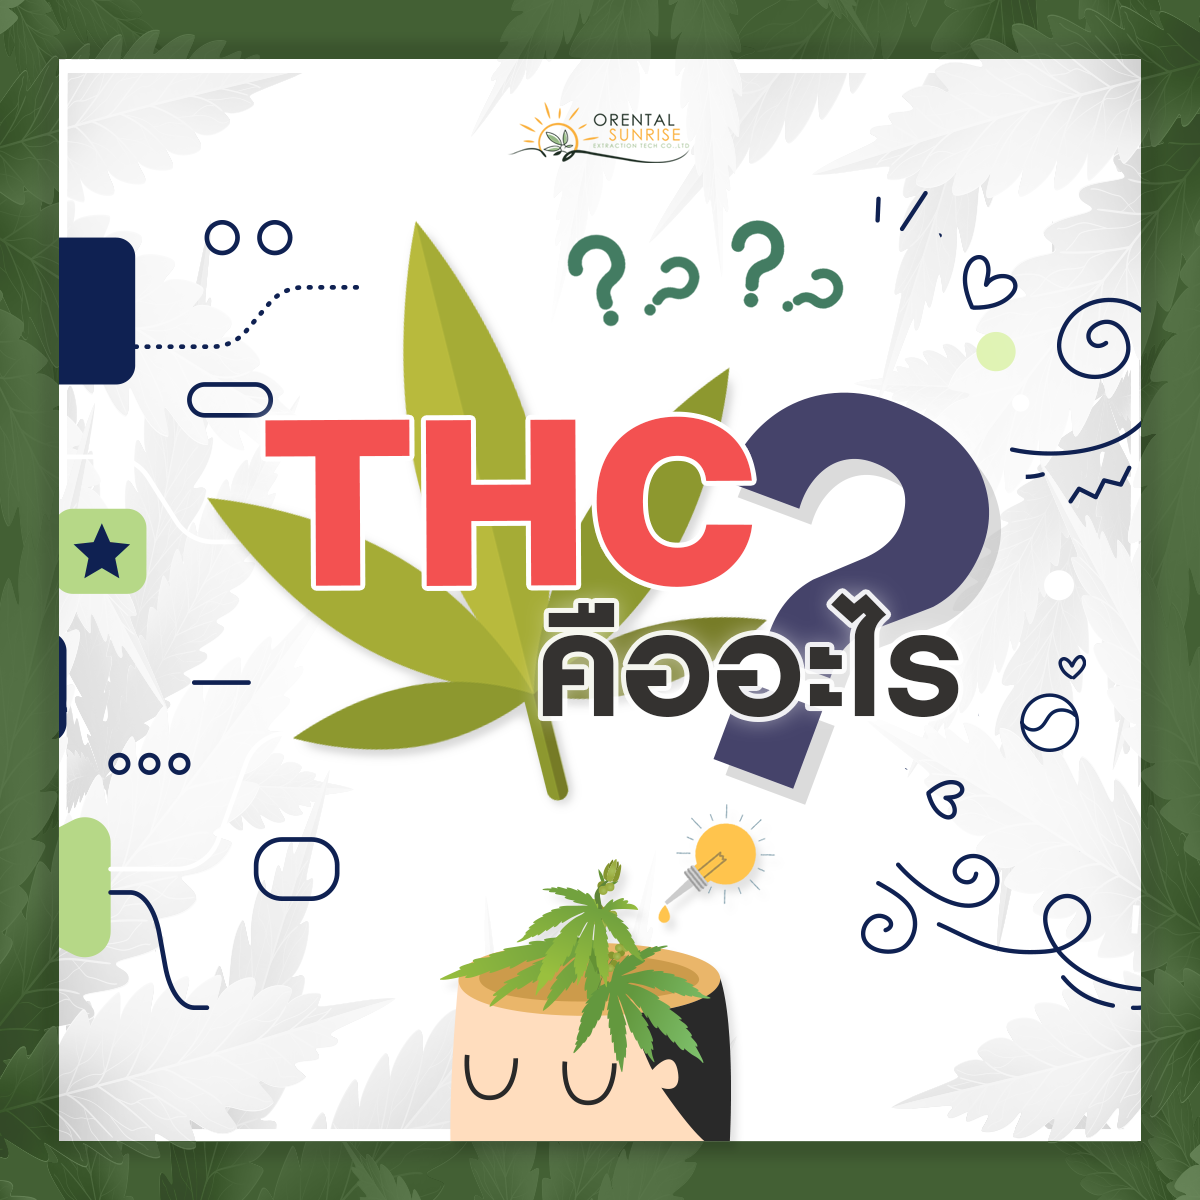 THC What is it? Let’s get to know each other